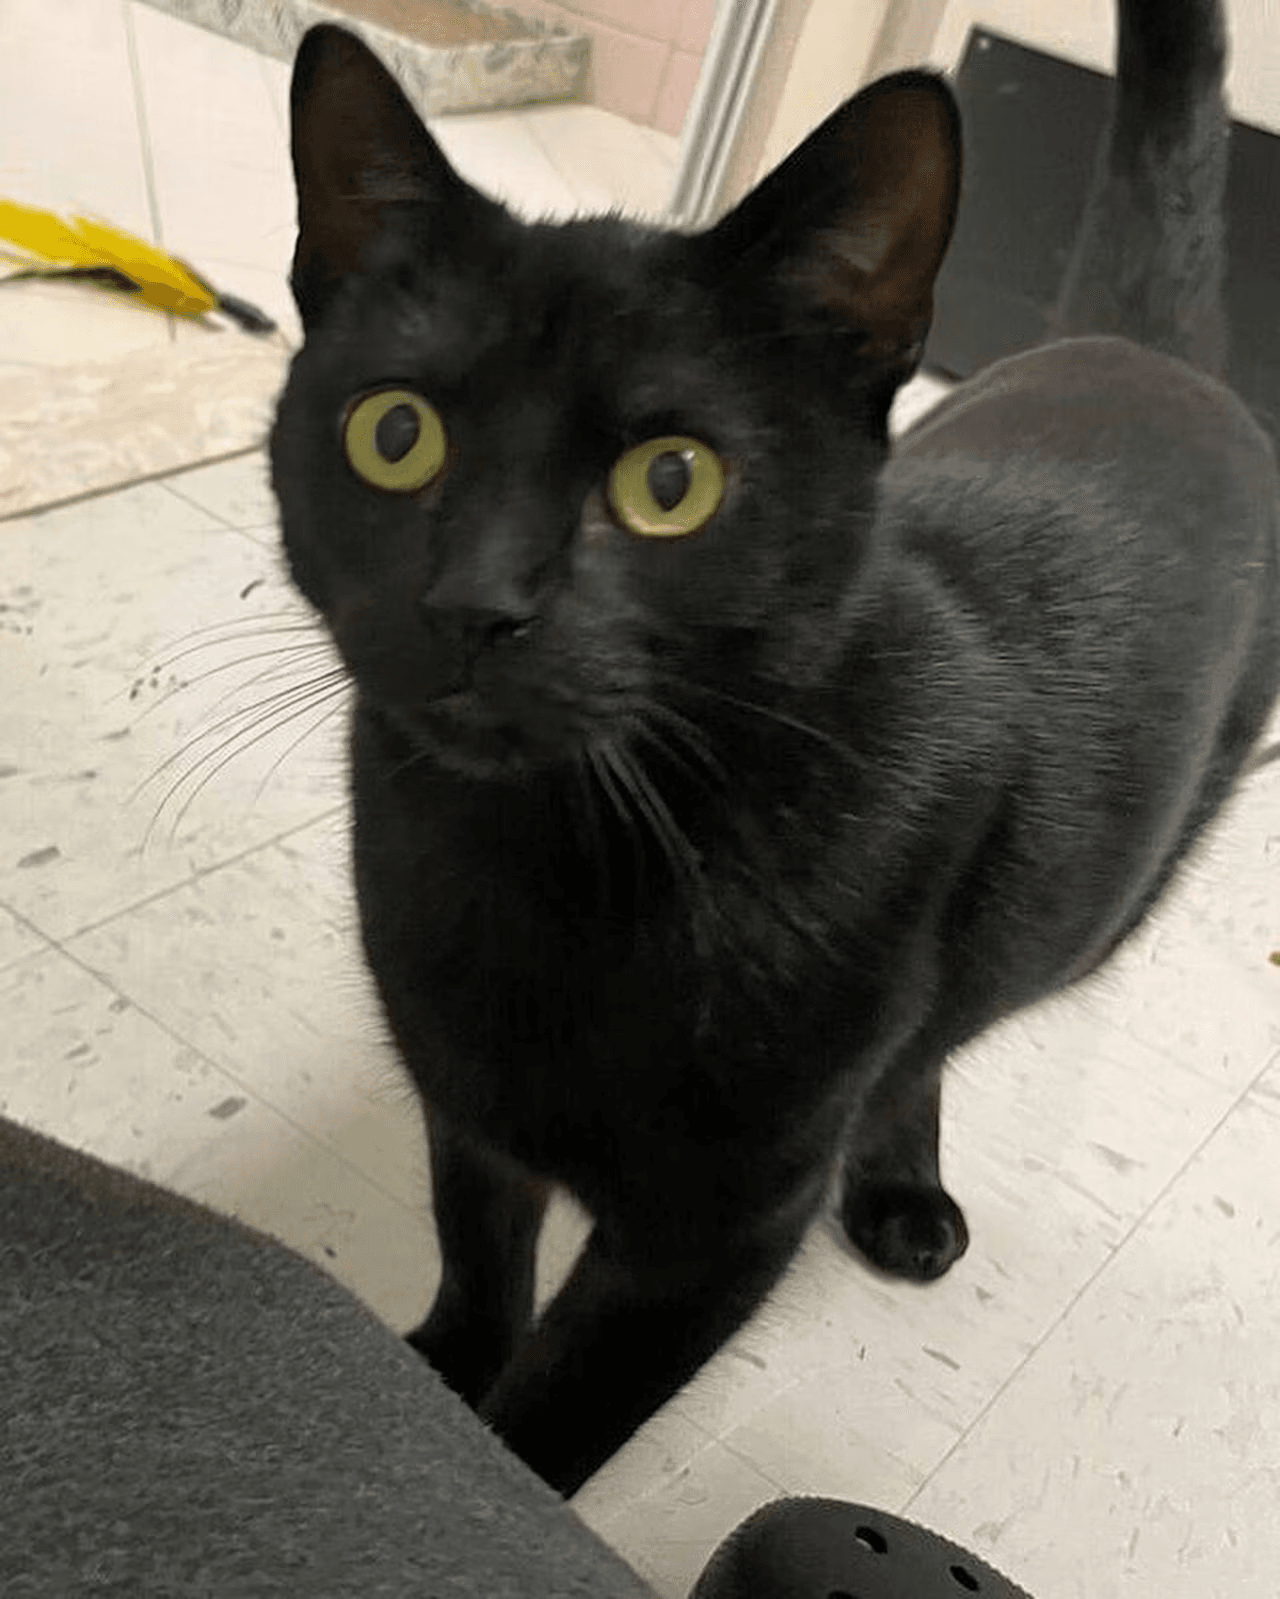 People finally want to adopt this overlooked N.J. black cat thanks to her viral video (NJ.com)